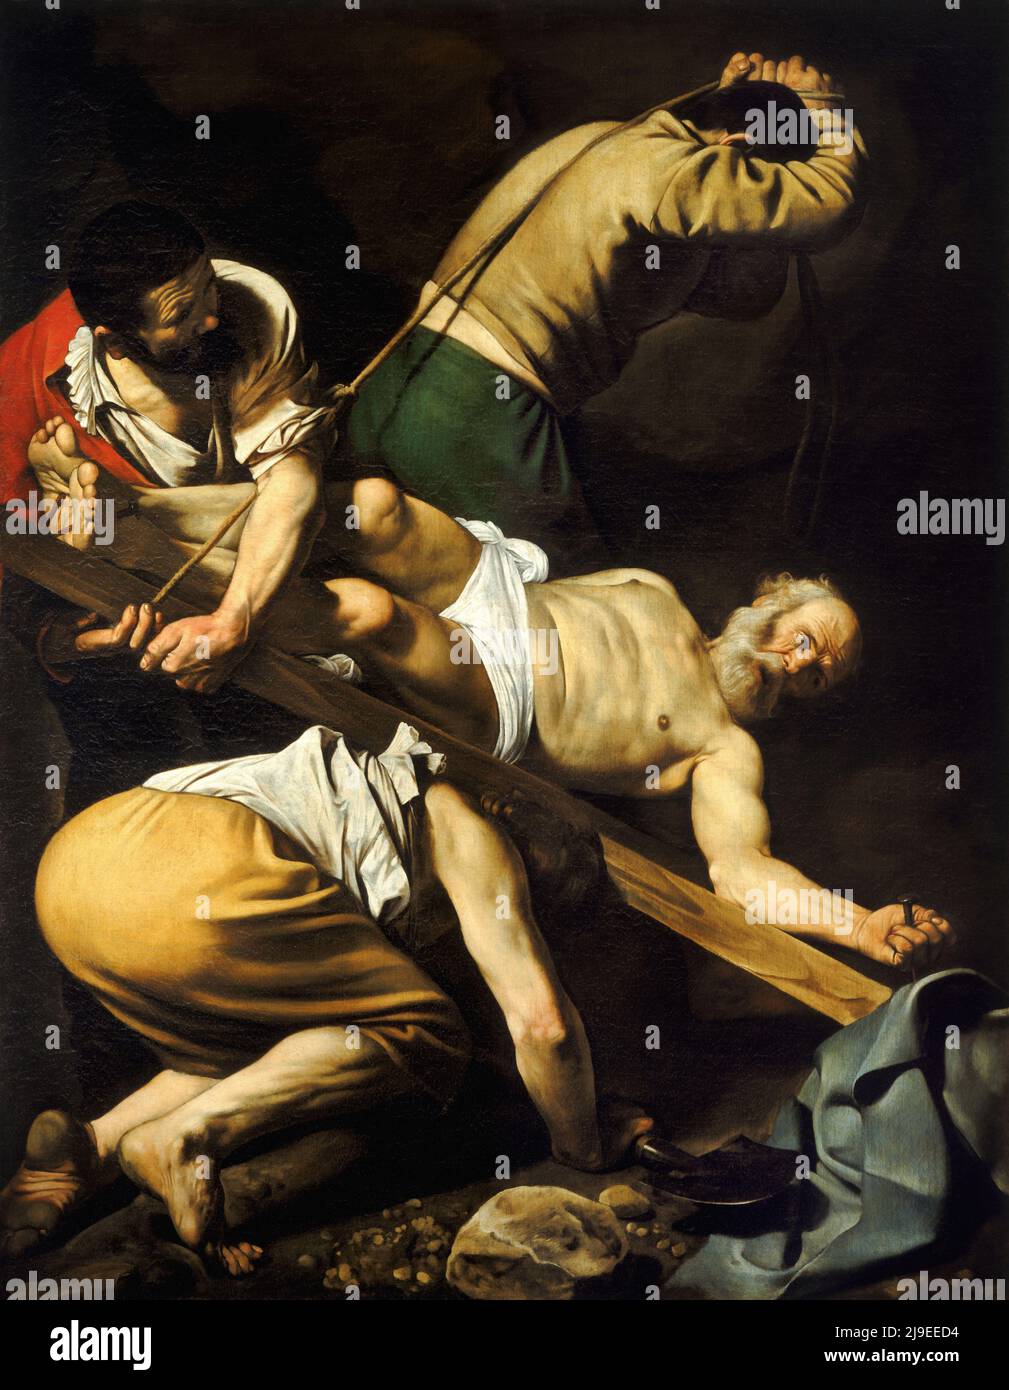 The Crucifixion of Saint Peter by Caravaggio Stock Photo